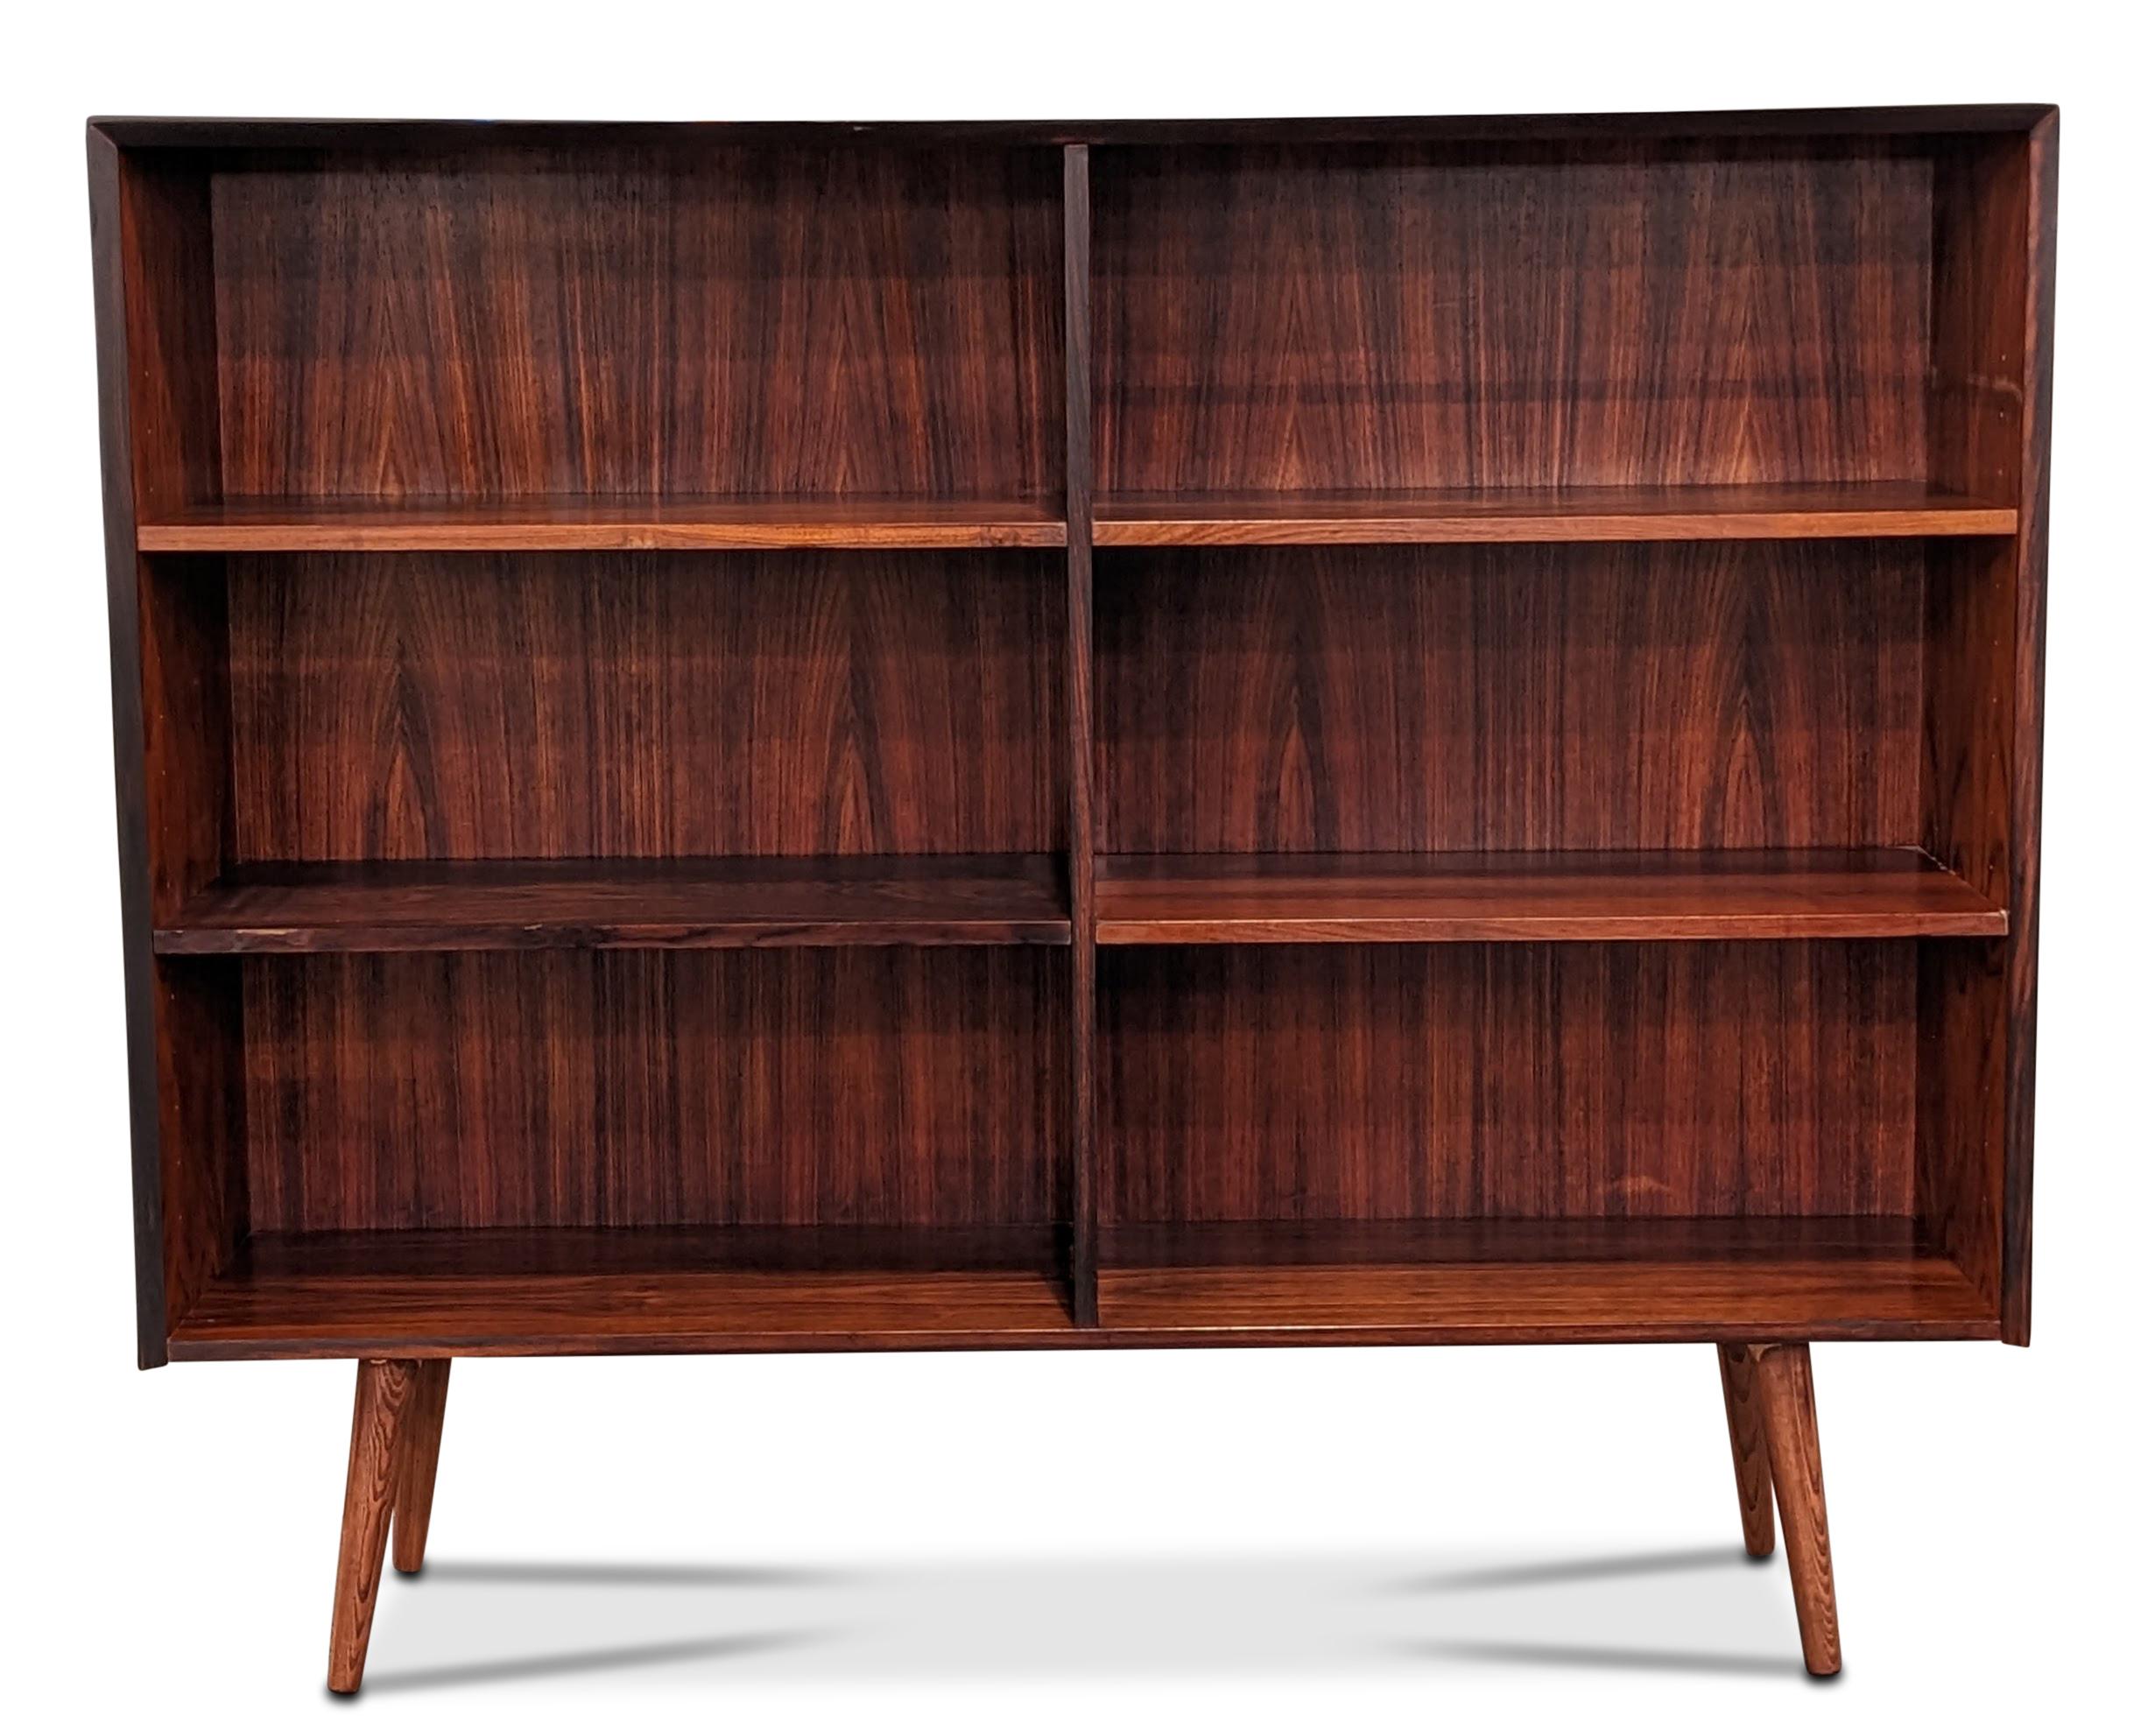 Vintage Danish Mid-Century Modern, made in the 1950s - recently refurbished

These pieces are more than 65+ years old and some wear and tear can be expected, but we do everything we can to refurbish them in respect to the design.

Brazilian